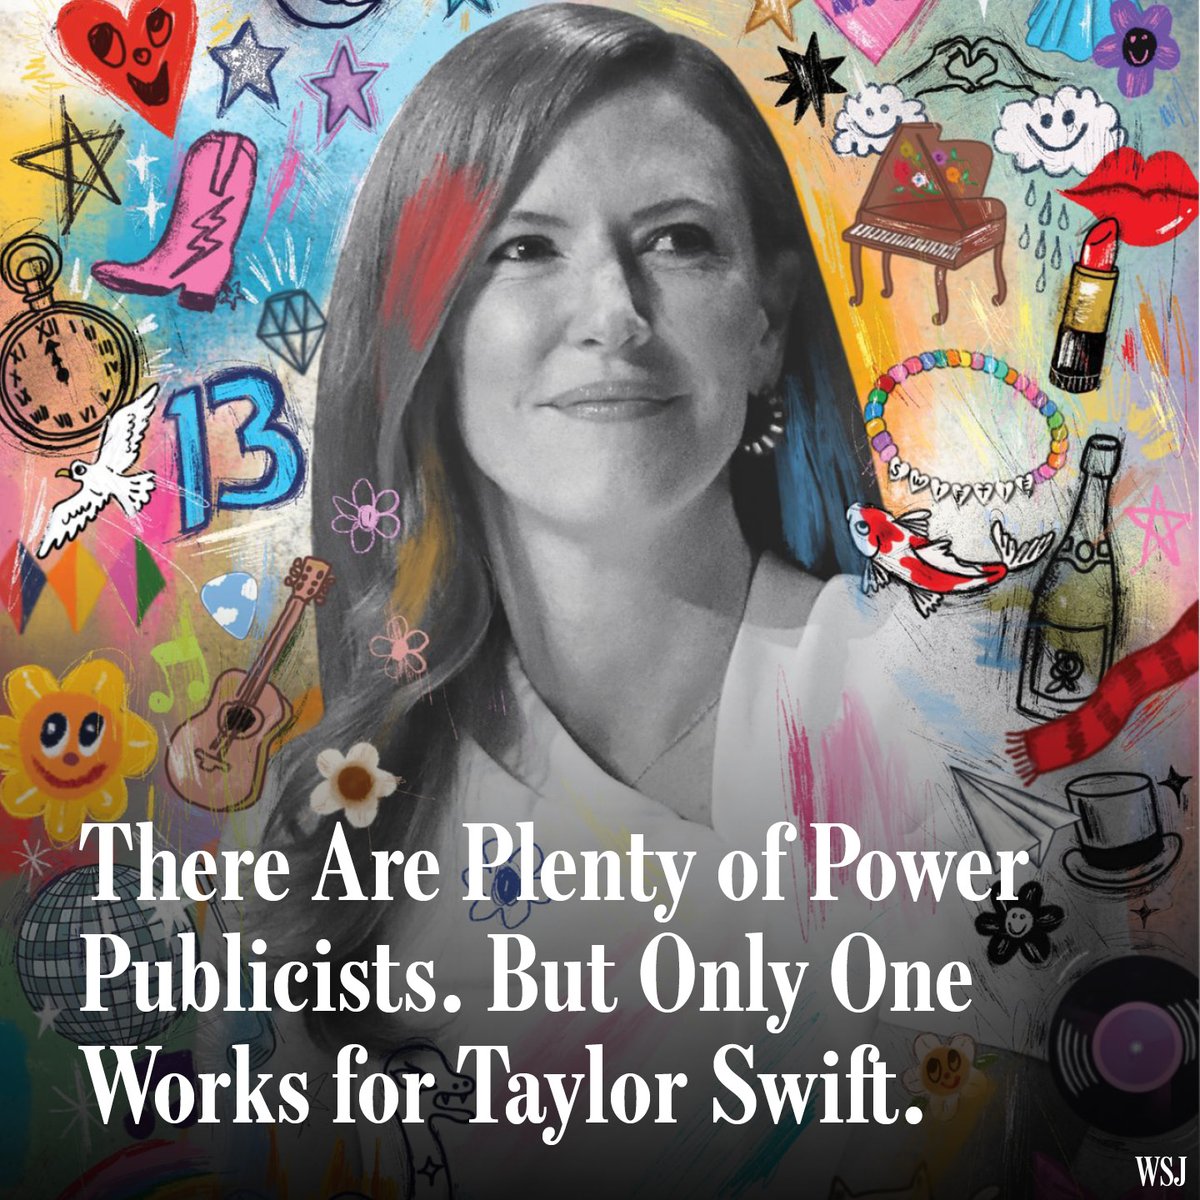 Taylor Swift’s publicist has built a reputation all her own: “The devil works hard, but Tree Paine works harder.” on.wsj.com/3xI8Iwh